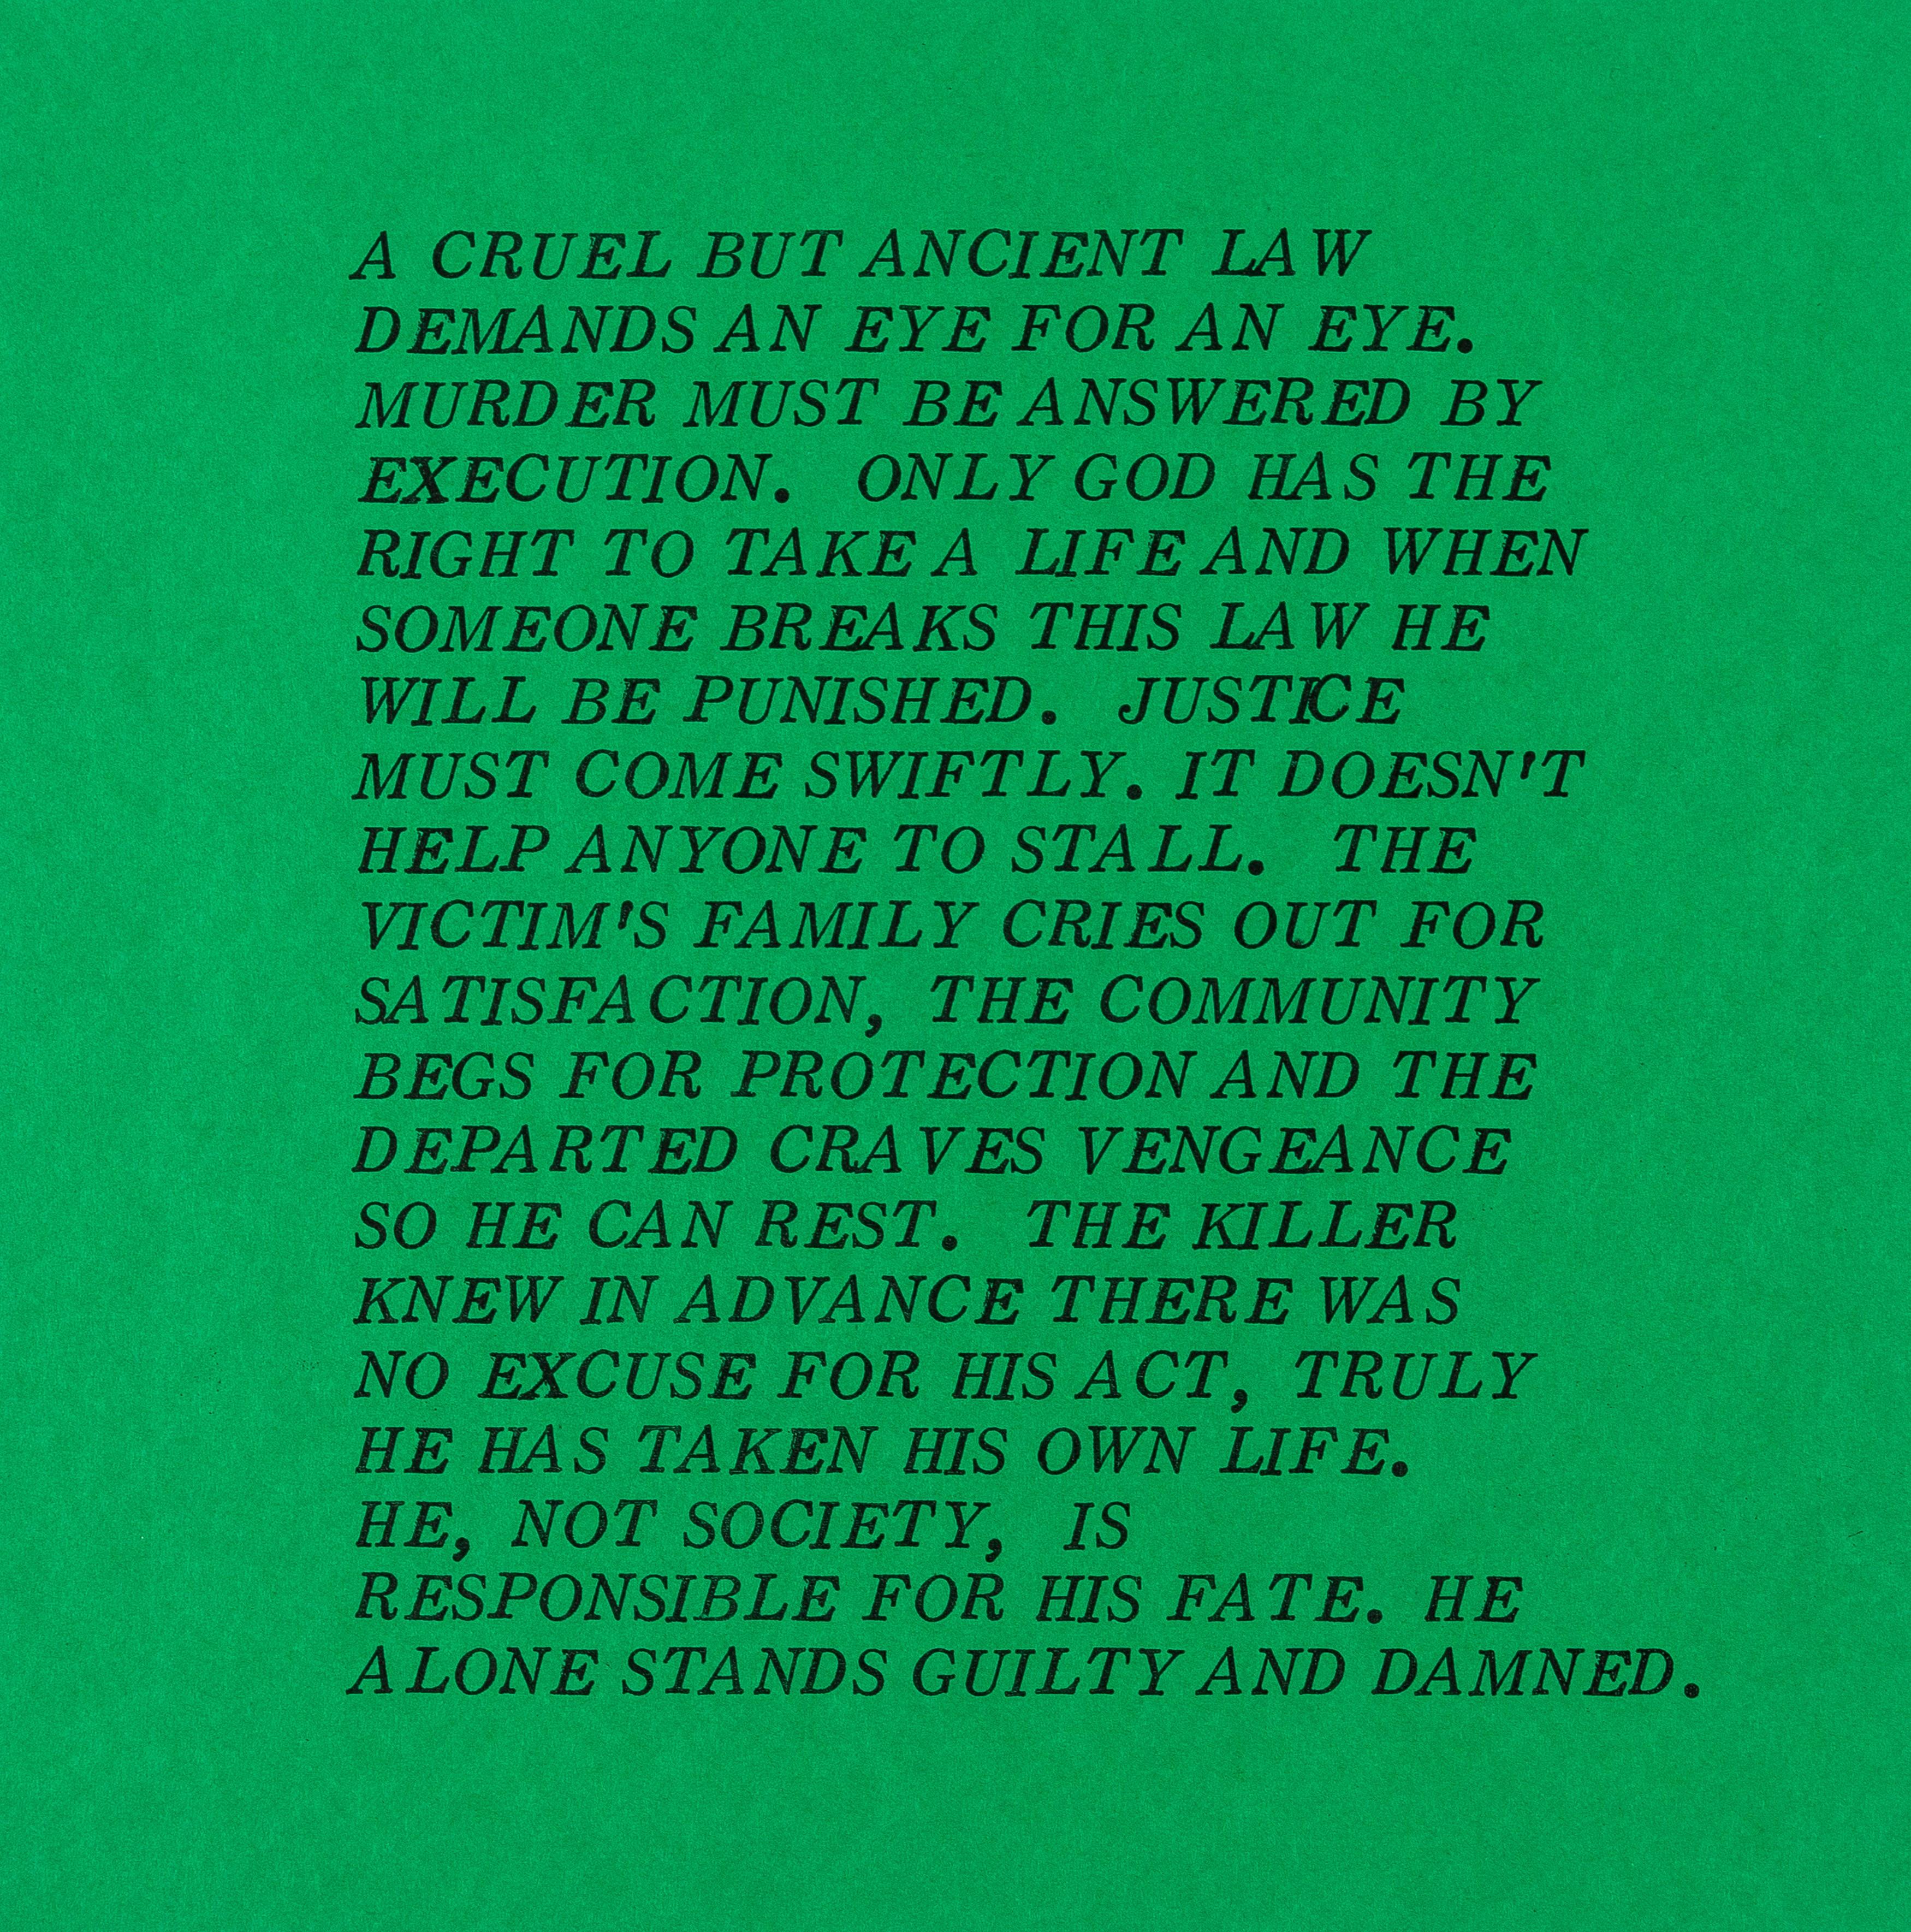 10 Inflammatory Essays 1979-1982 -- Lithograph, Small Set, Text Art by Holzer - Feminist Print by Jenny Holzer